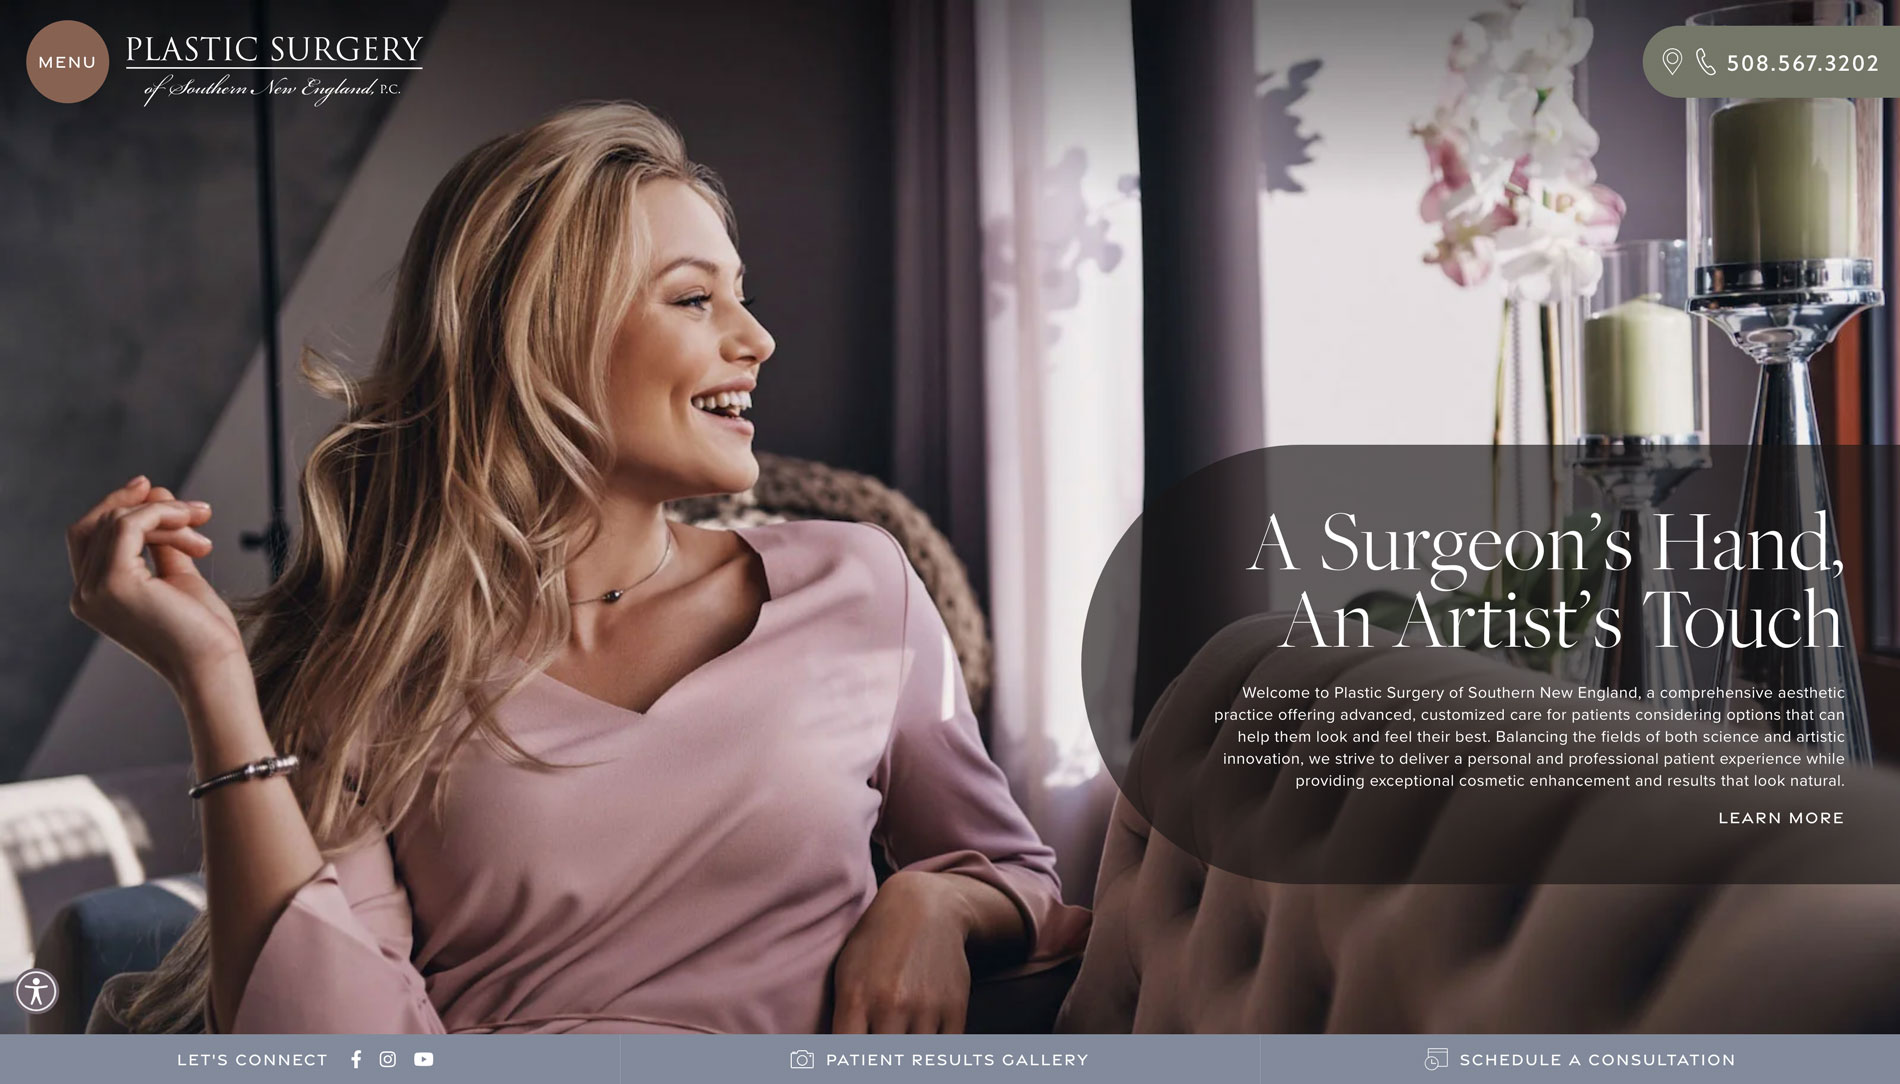 Dr. Russell Babbitt works with Rosemont Media to redesign the website for Plastic Surgery of Southern New England.